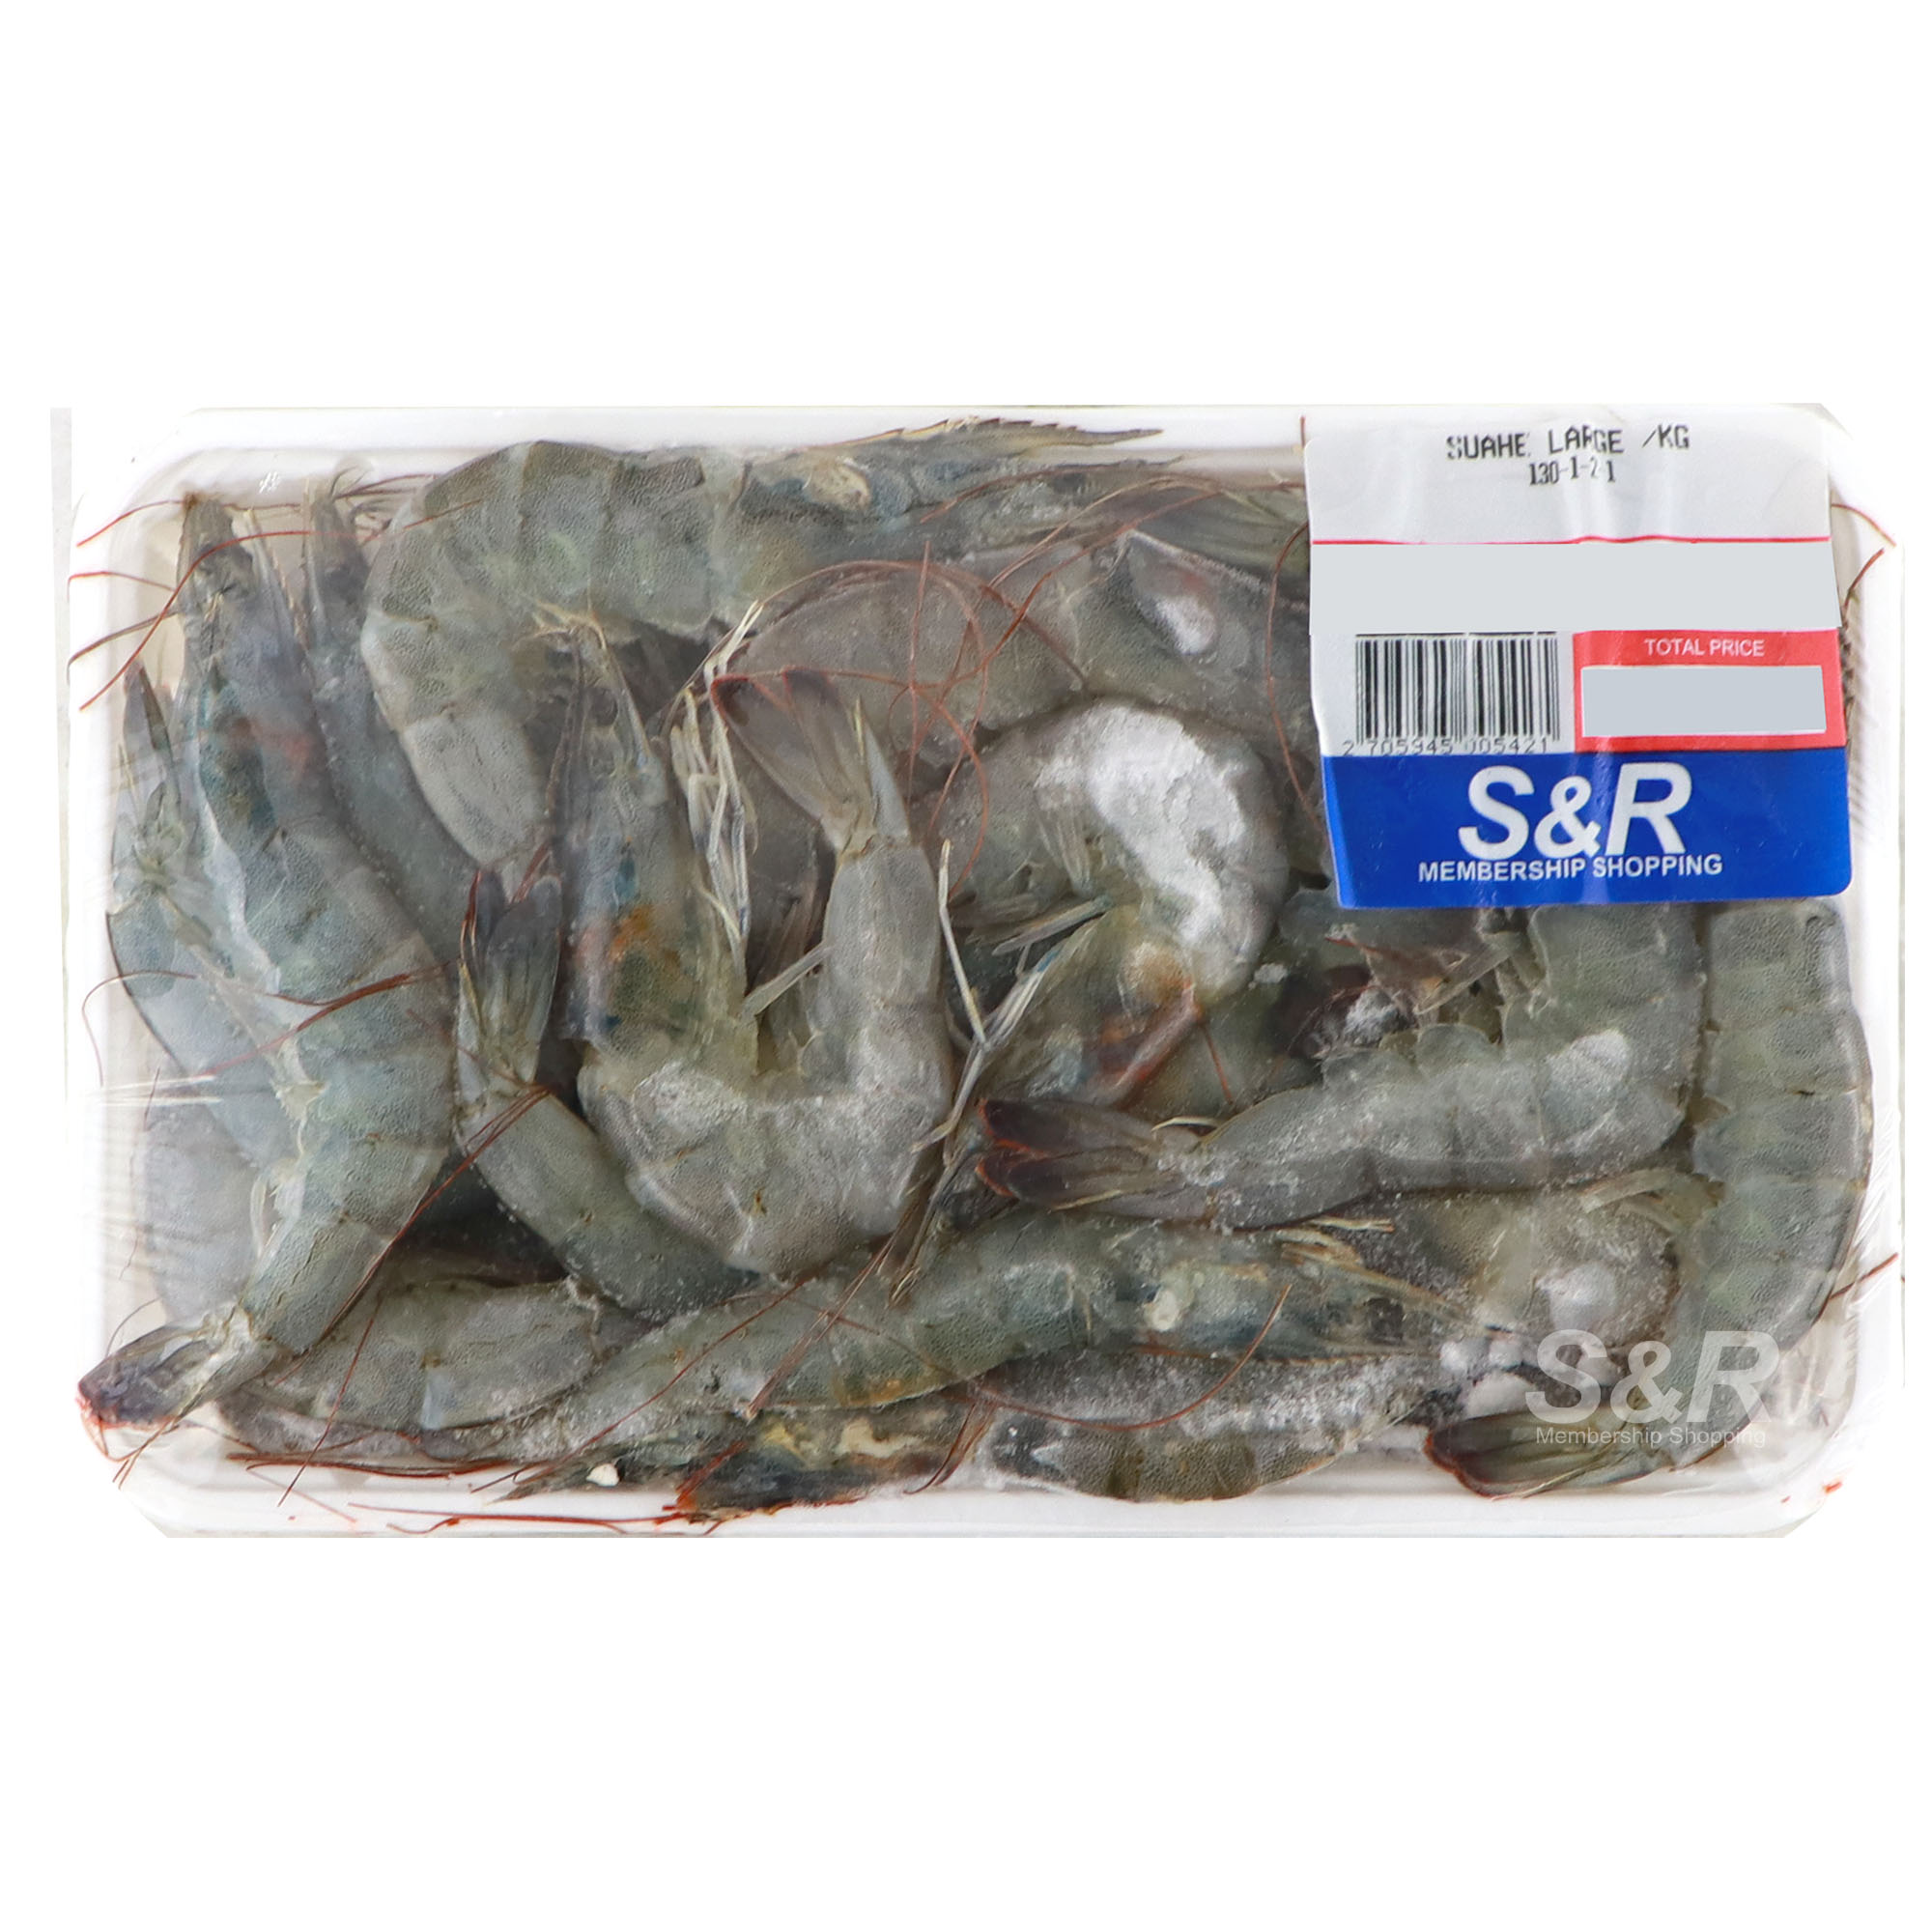 S&R Suahe Large approx. 1.3kg